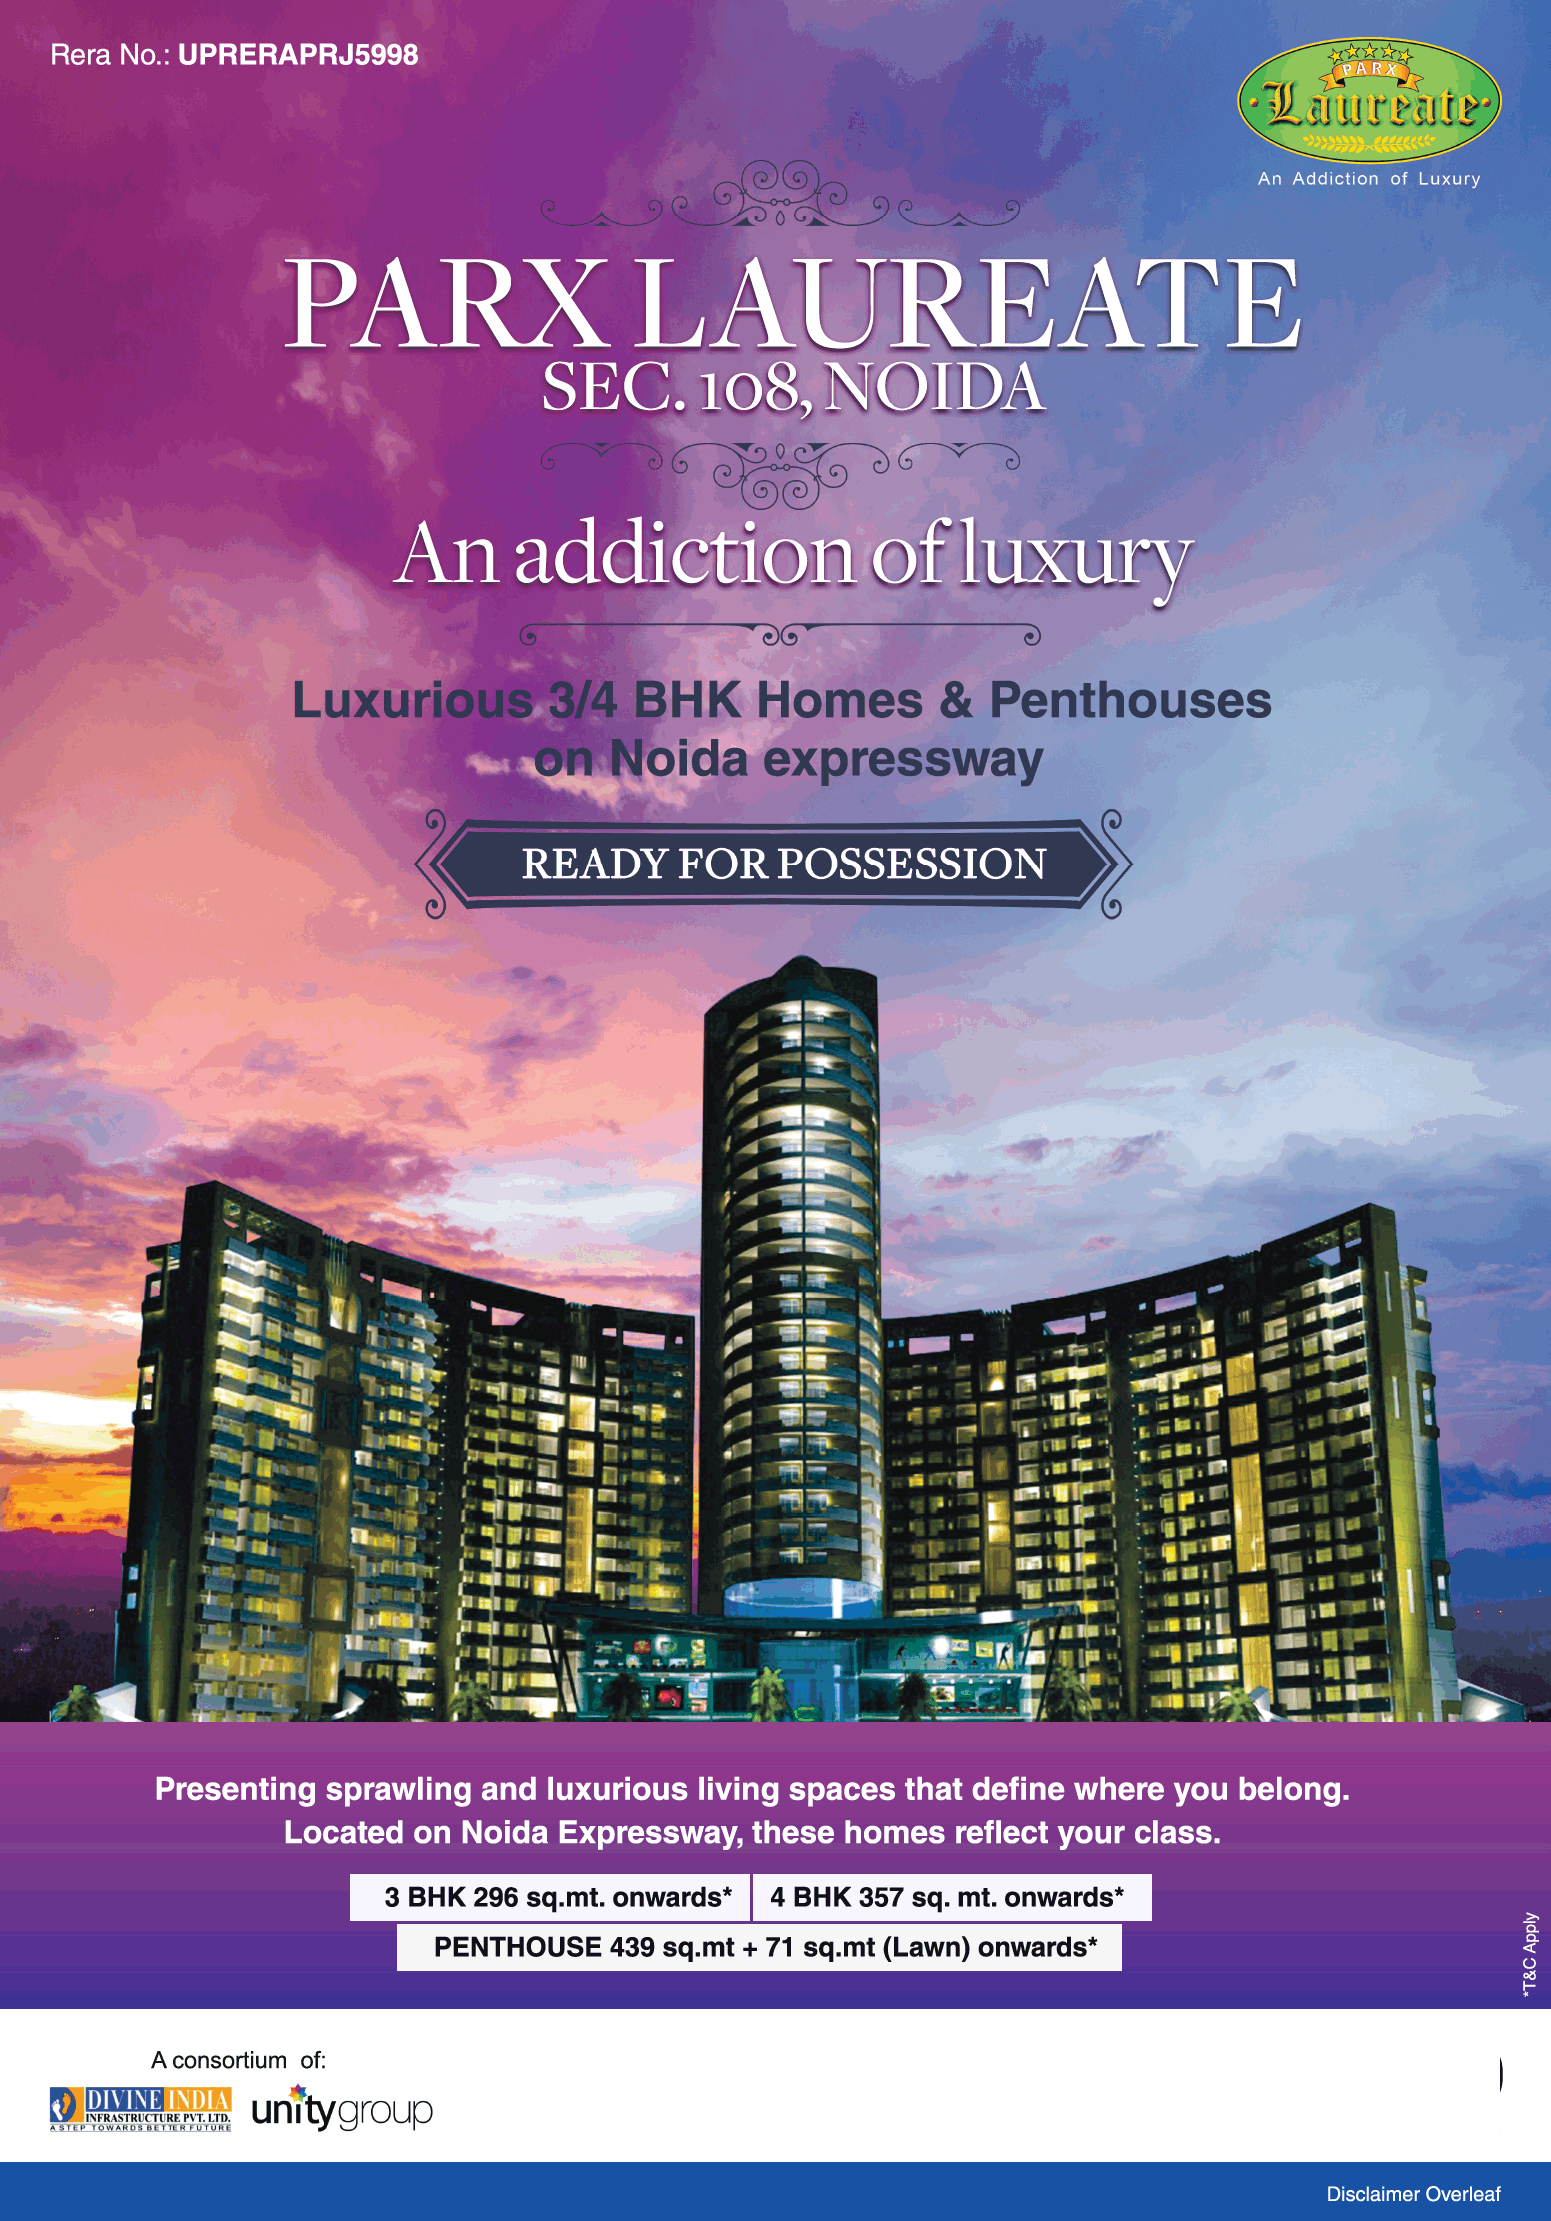 Luxurious 3/4 BHK Homes and Penthouses at Parx Laureate, Noida Update